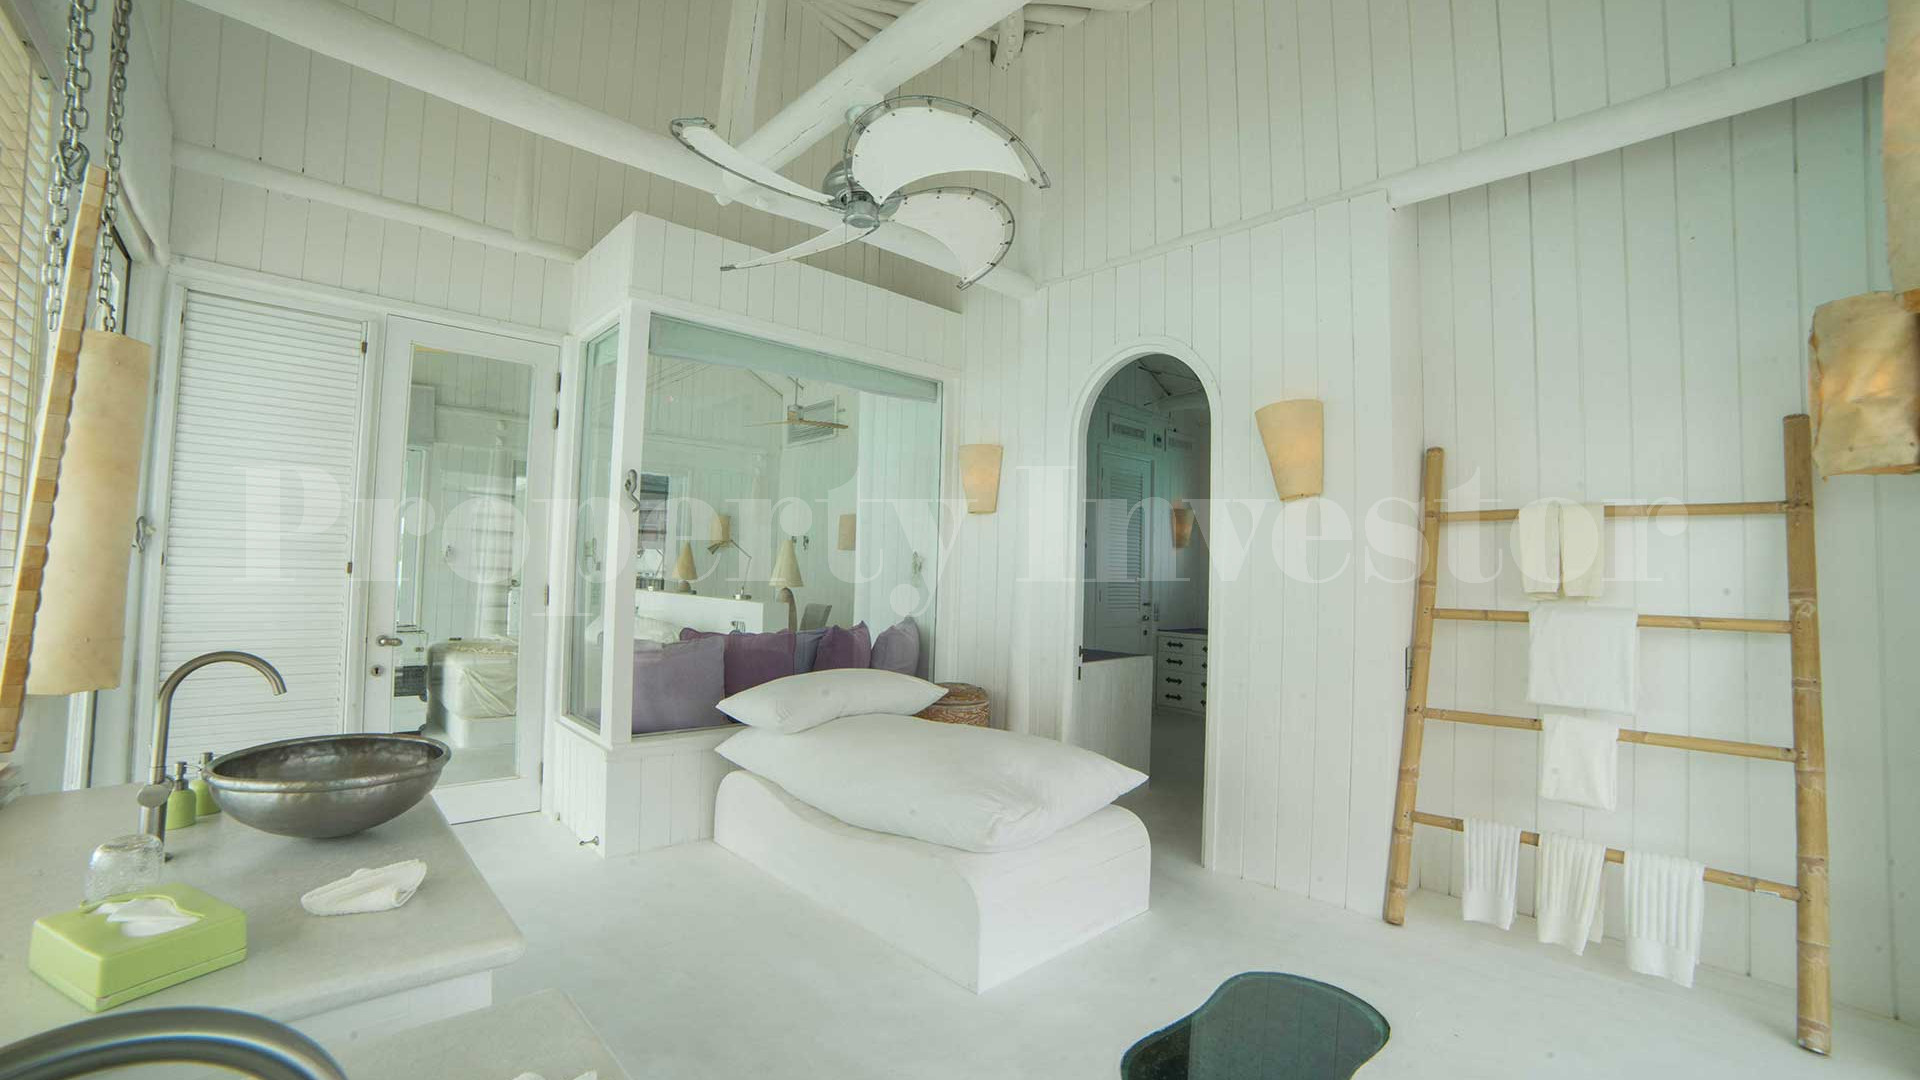 3 Bedroom Overwater Villa with Slide in the Maldives